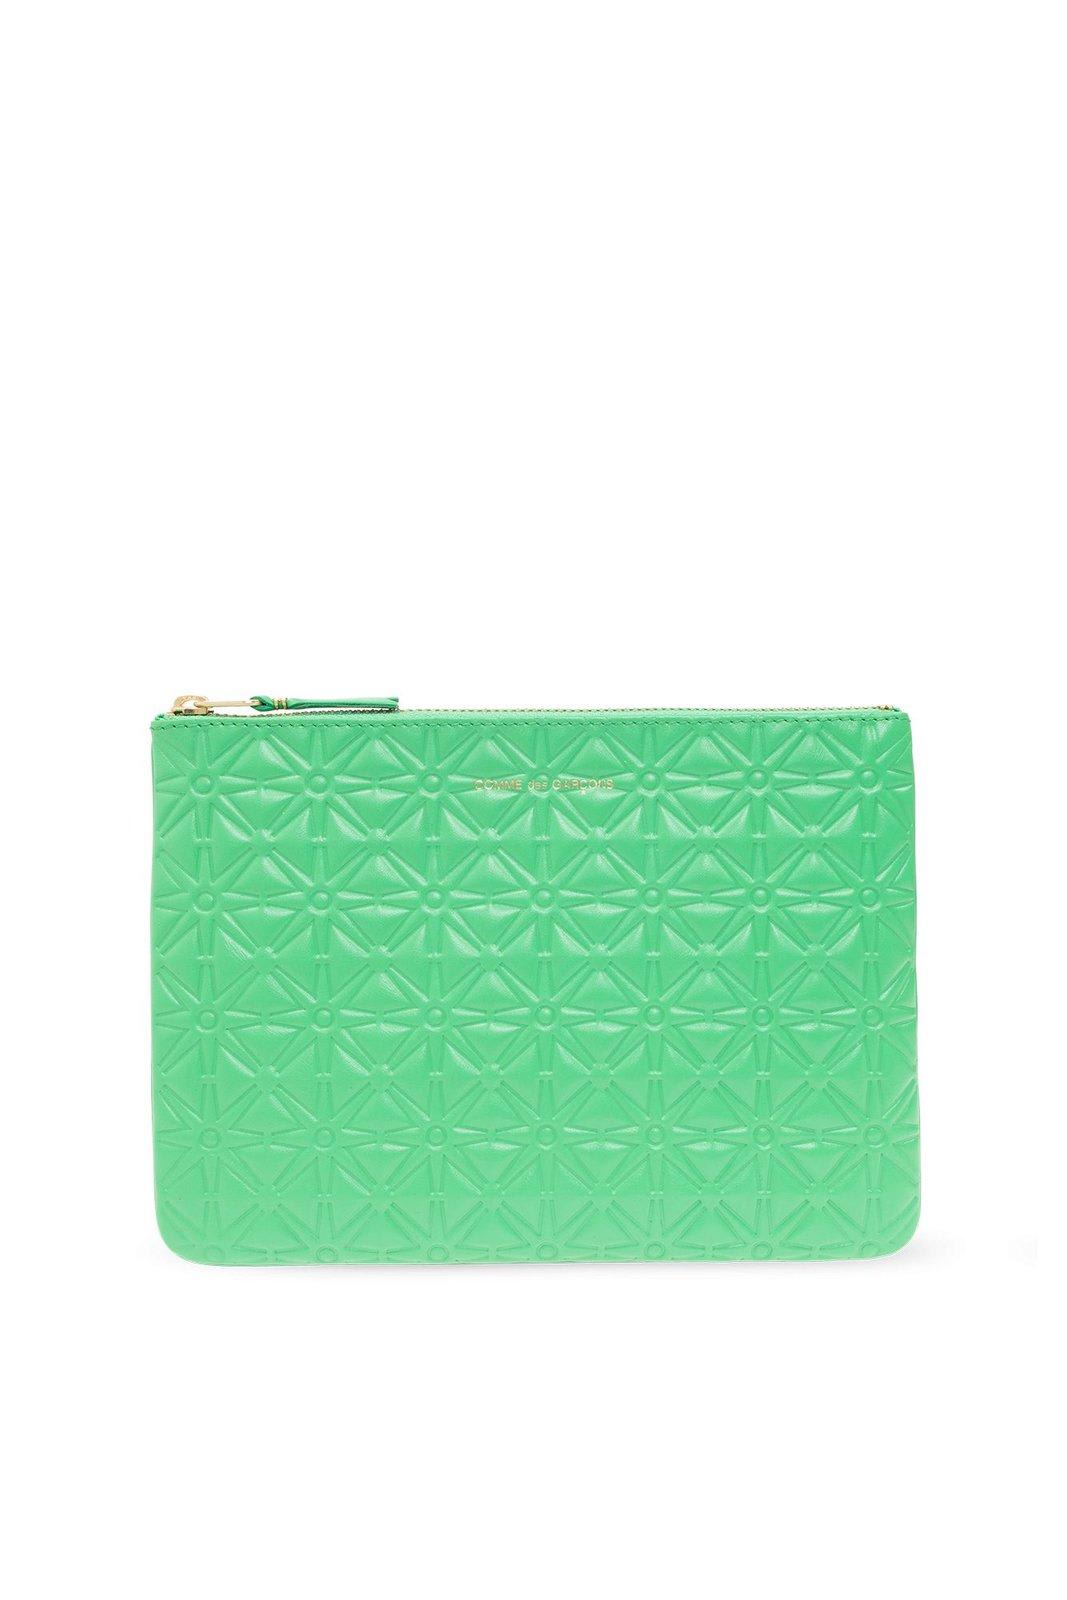 Comme Des Garçons Embossed Zipped Pouch In Gree Green